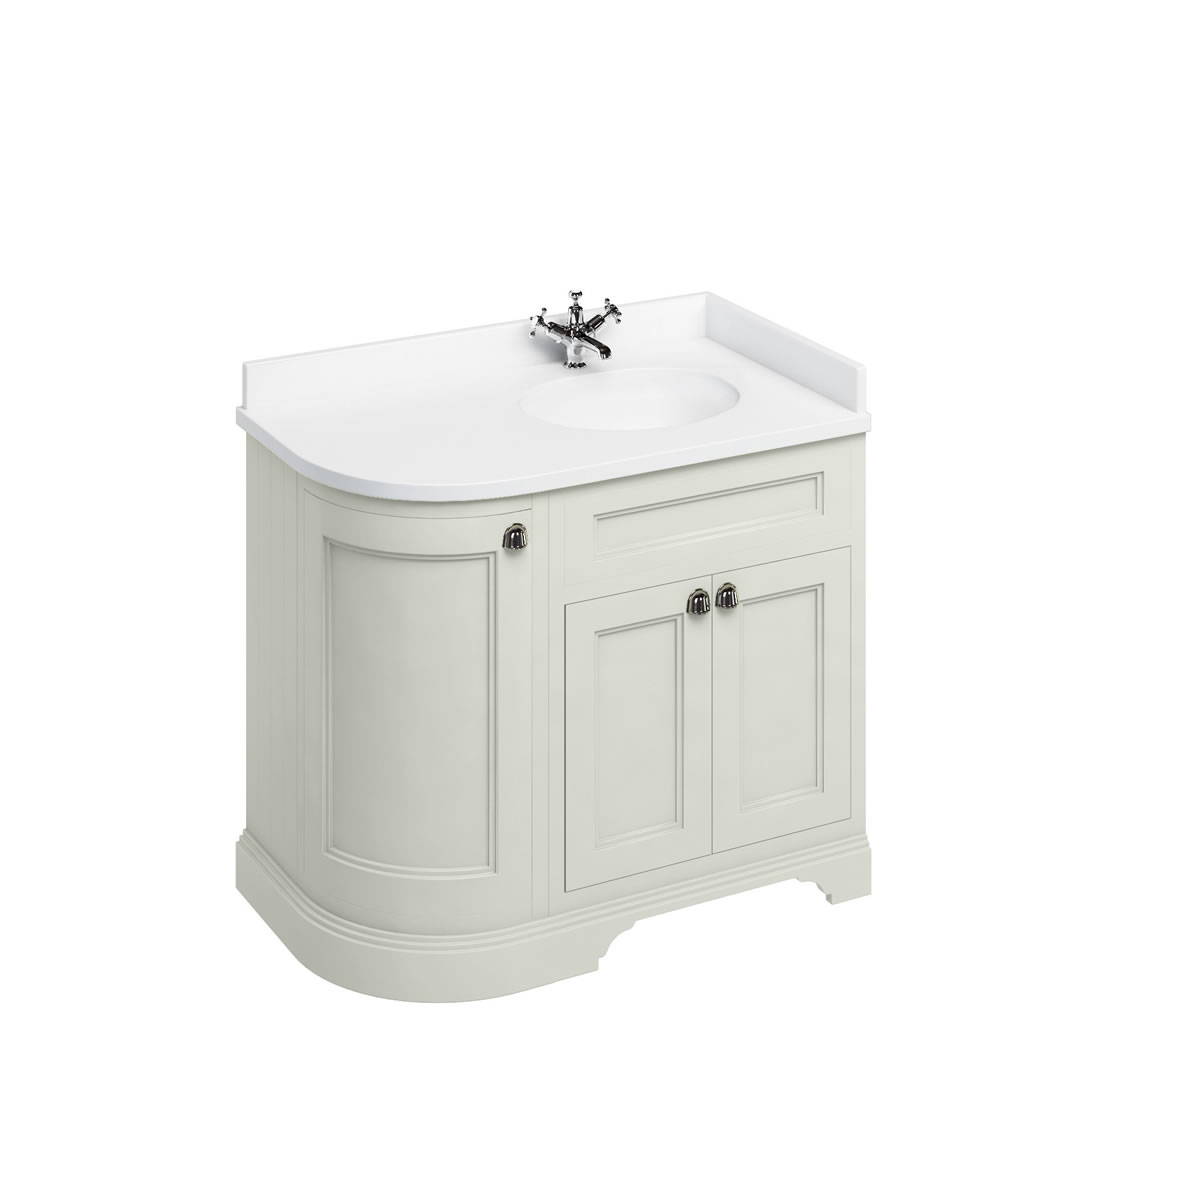 Freestanding 100 Curved Corner Vanity Unit Right Hand - Sand and Minerva white worktop with integrated white basin